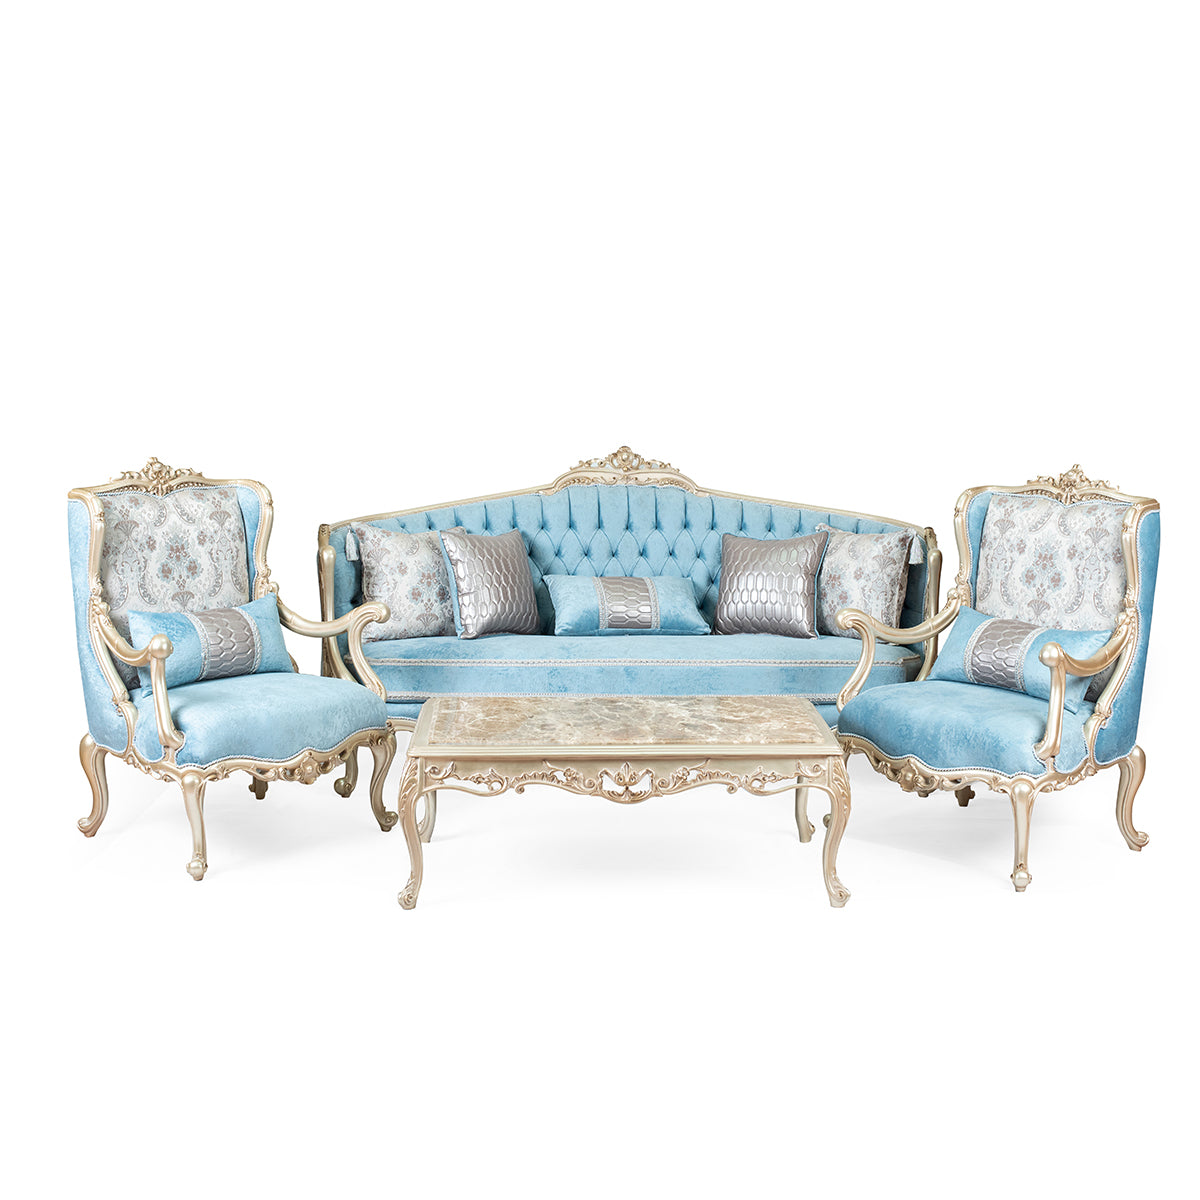 Juliet style sitting room (5 pieces)